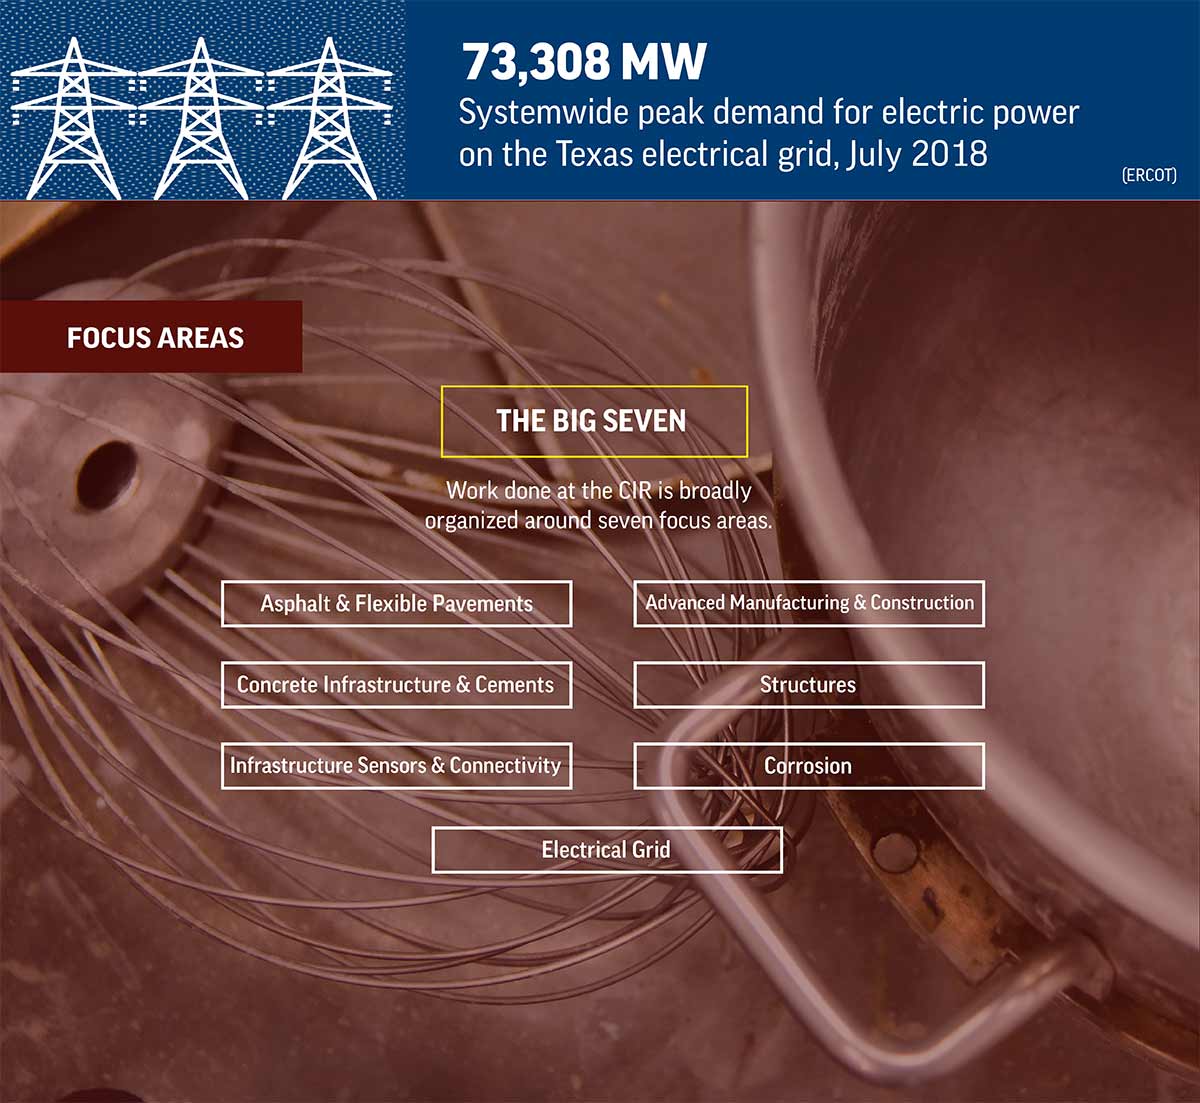 73,308 MW systemwide peak demand for electric power on the Texas electrical grid, July 2018 - Focus Areas - The big seven